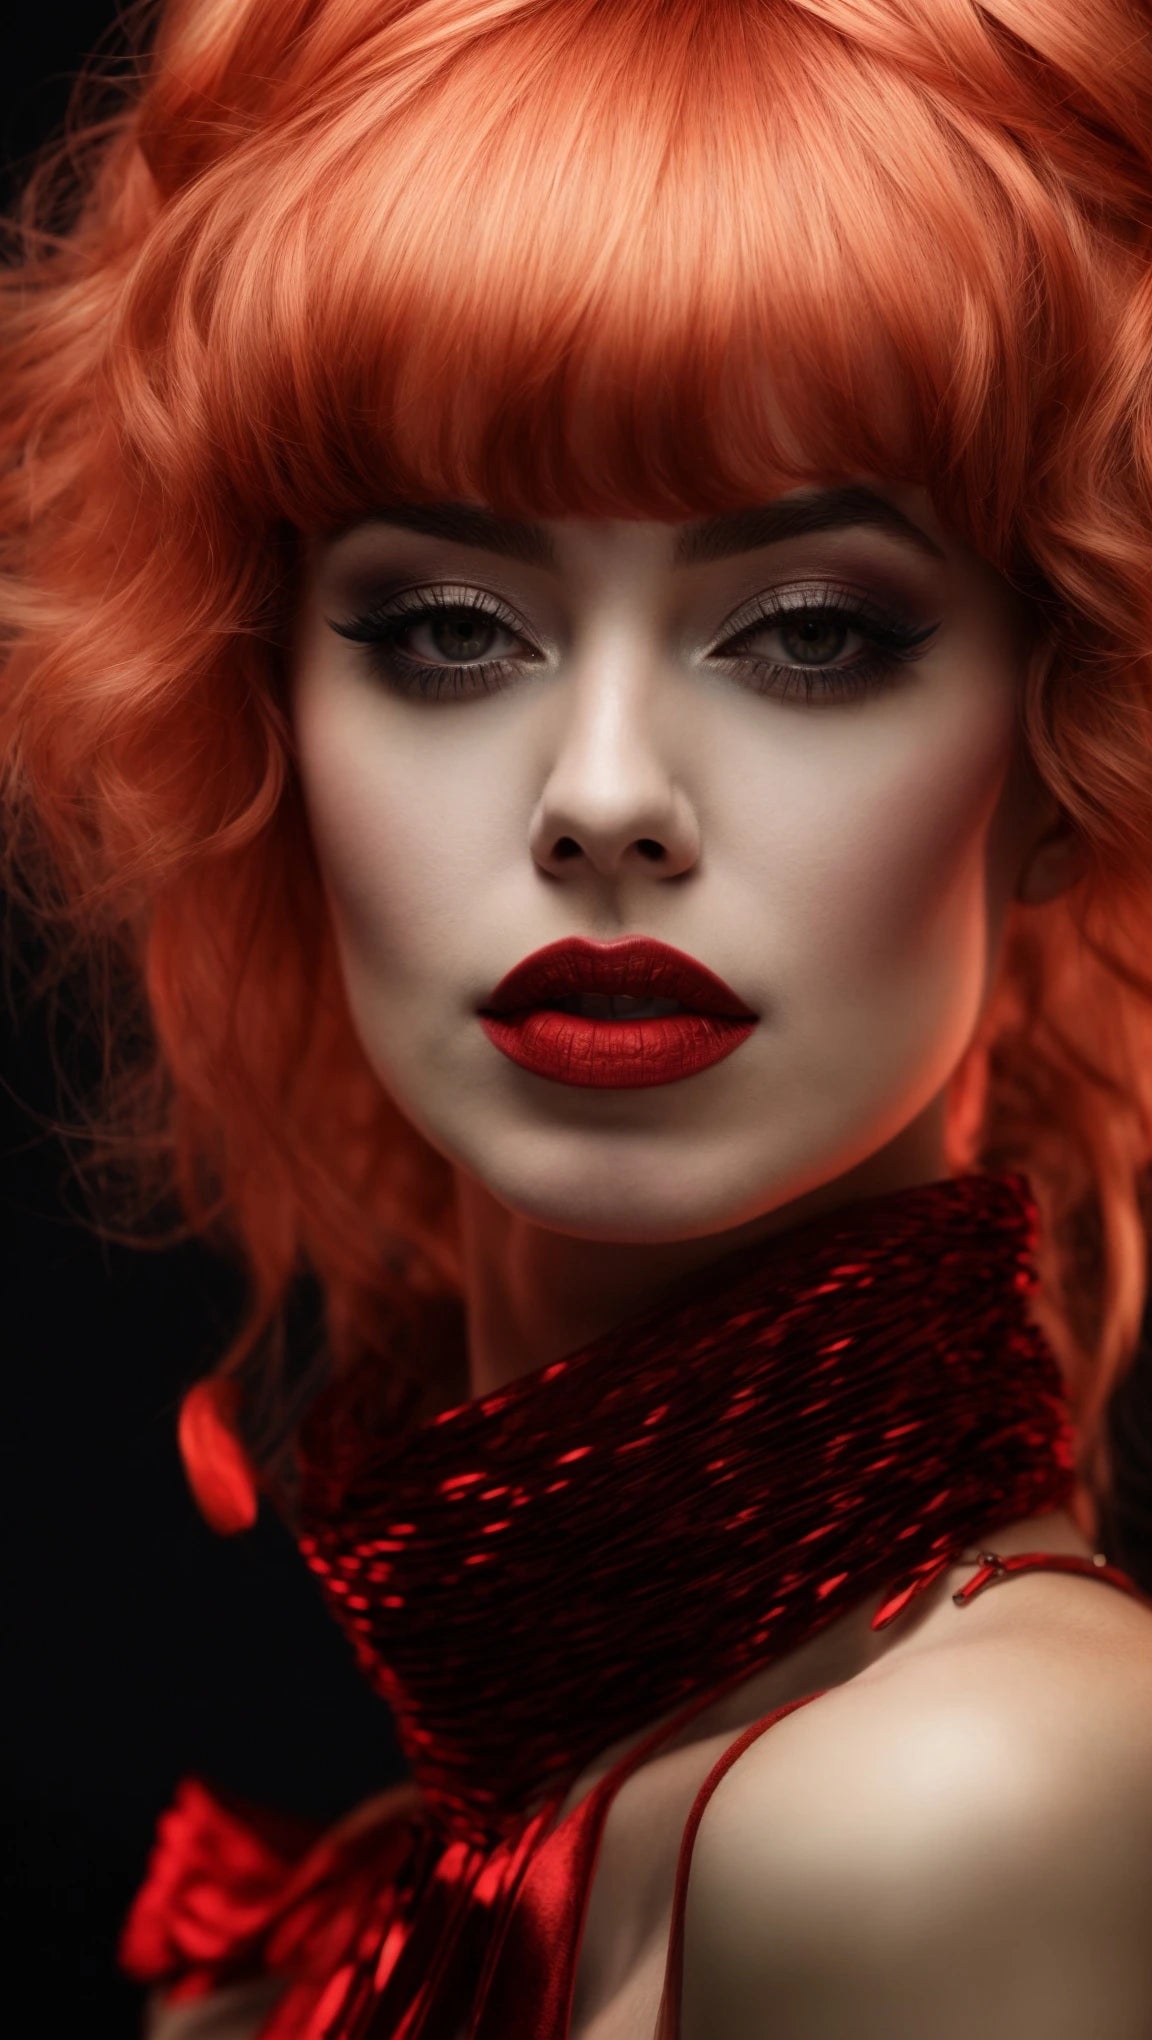 professionel model with red hair red lipstick makeup